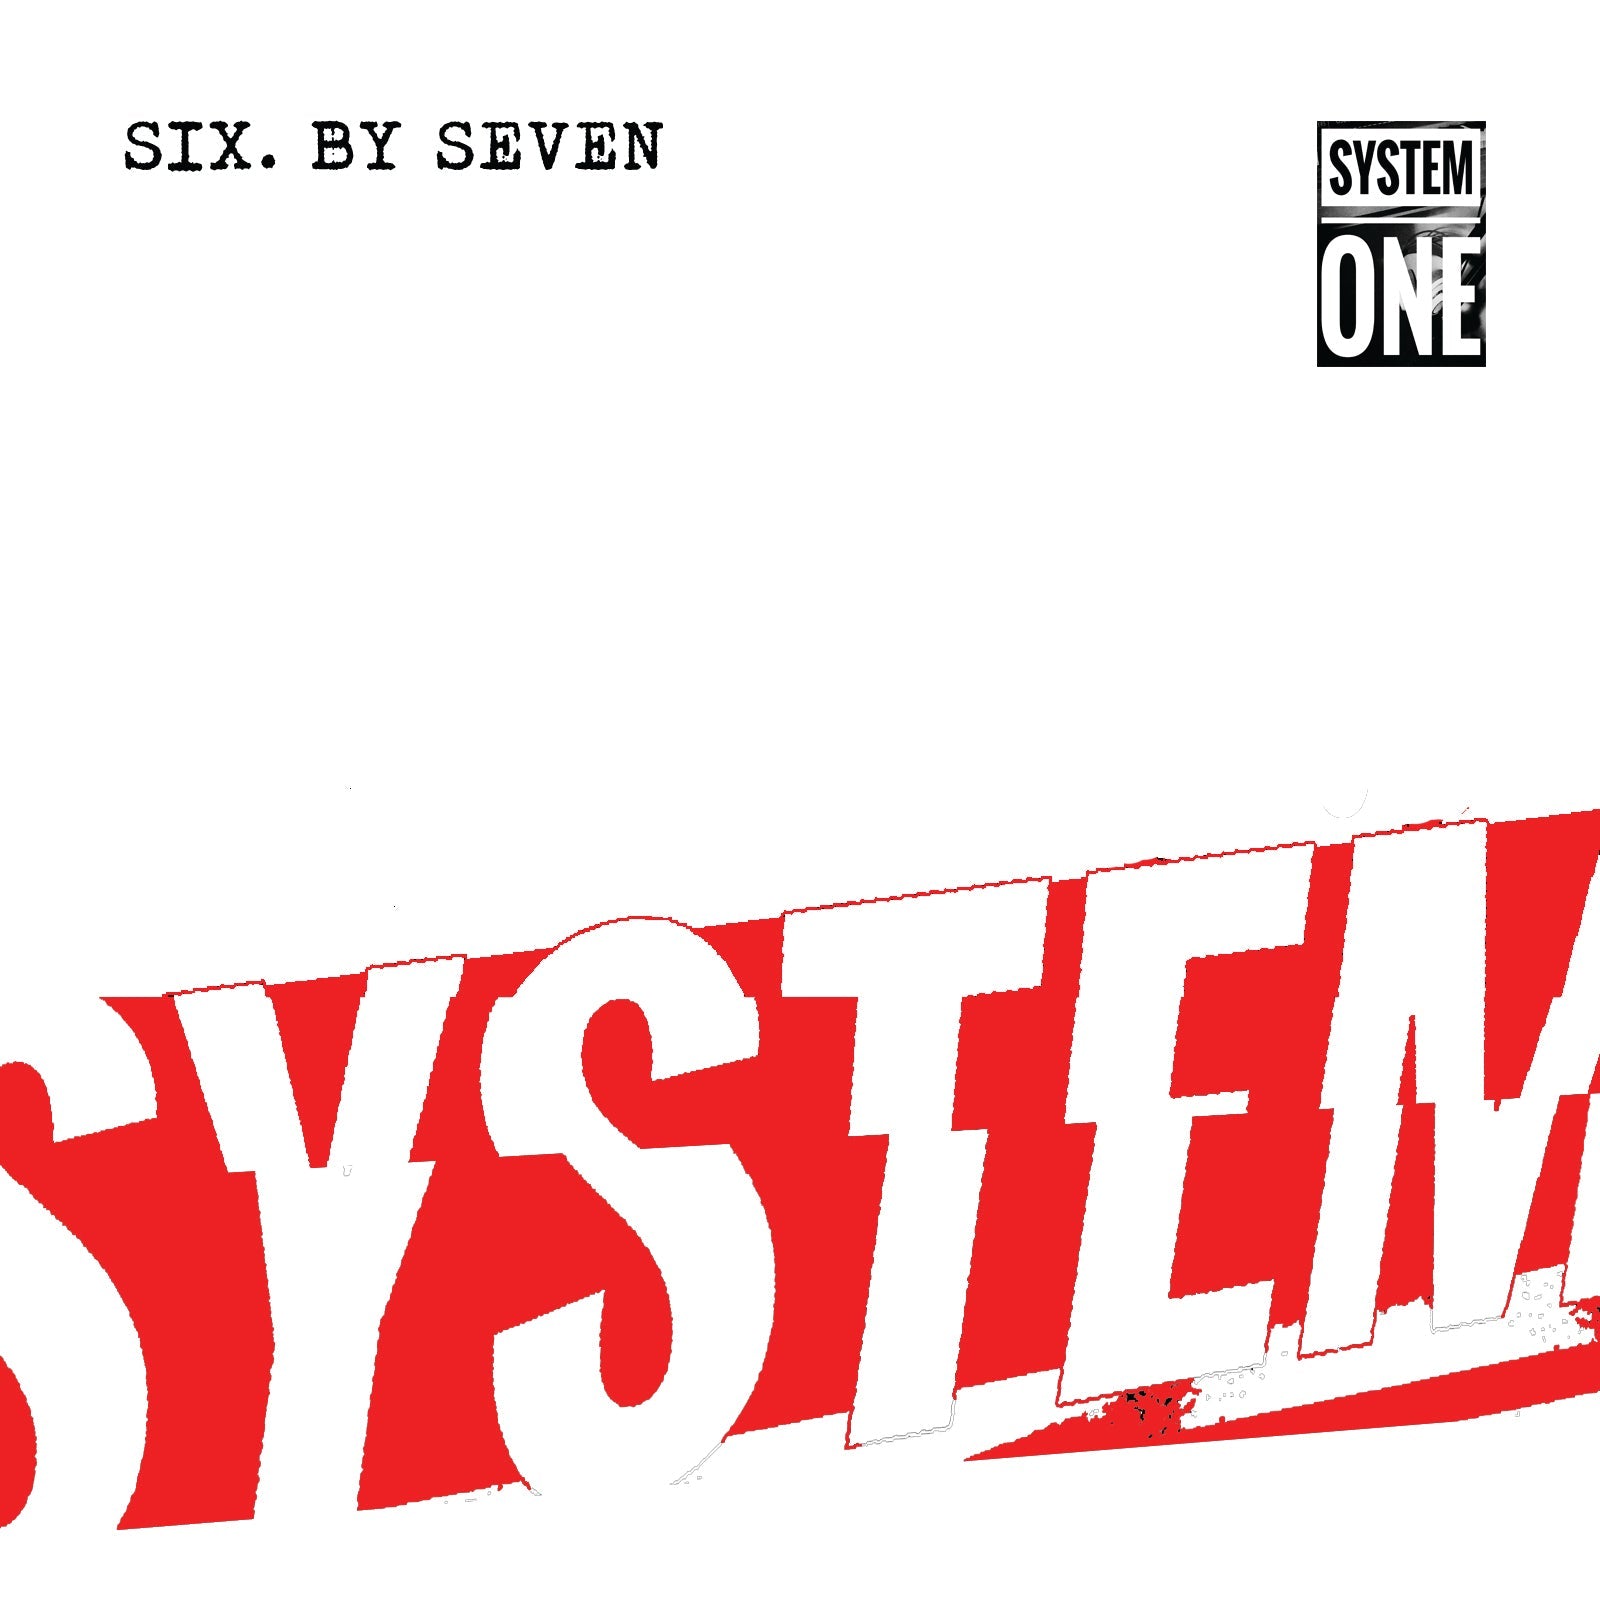 Six by Seven - System One - 33RPM